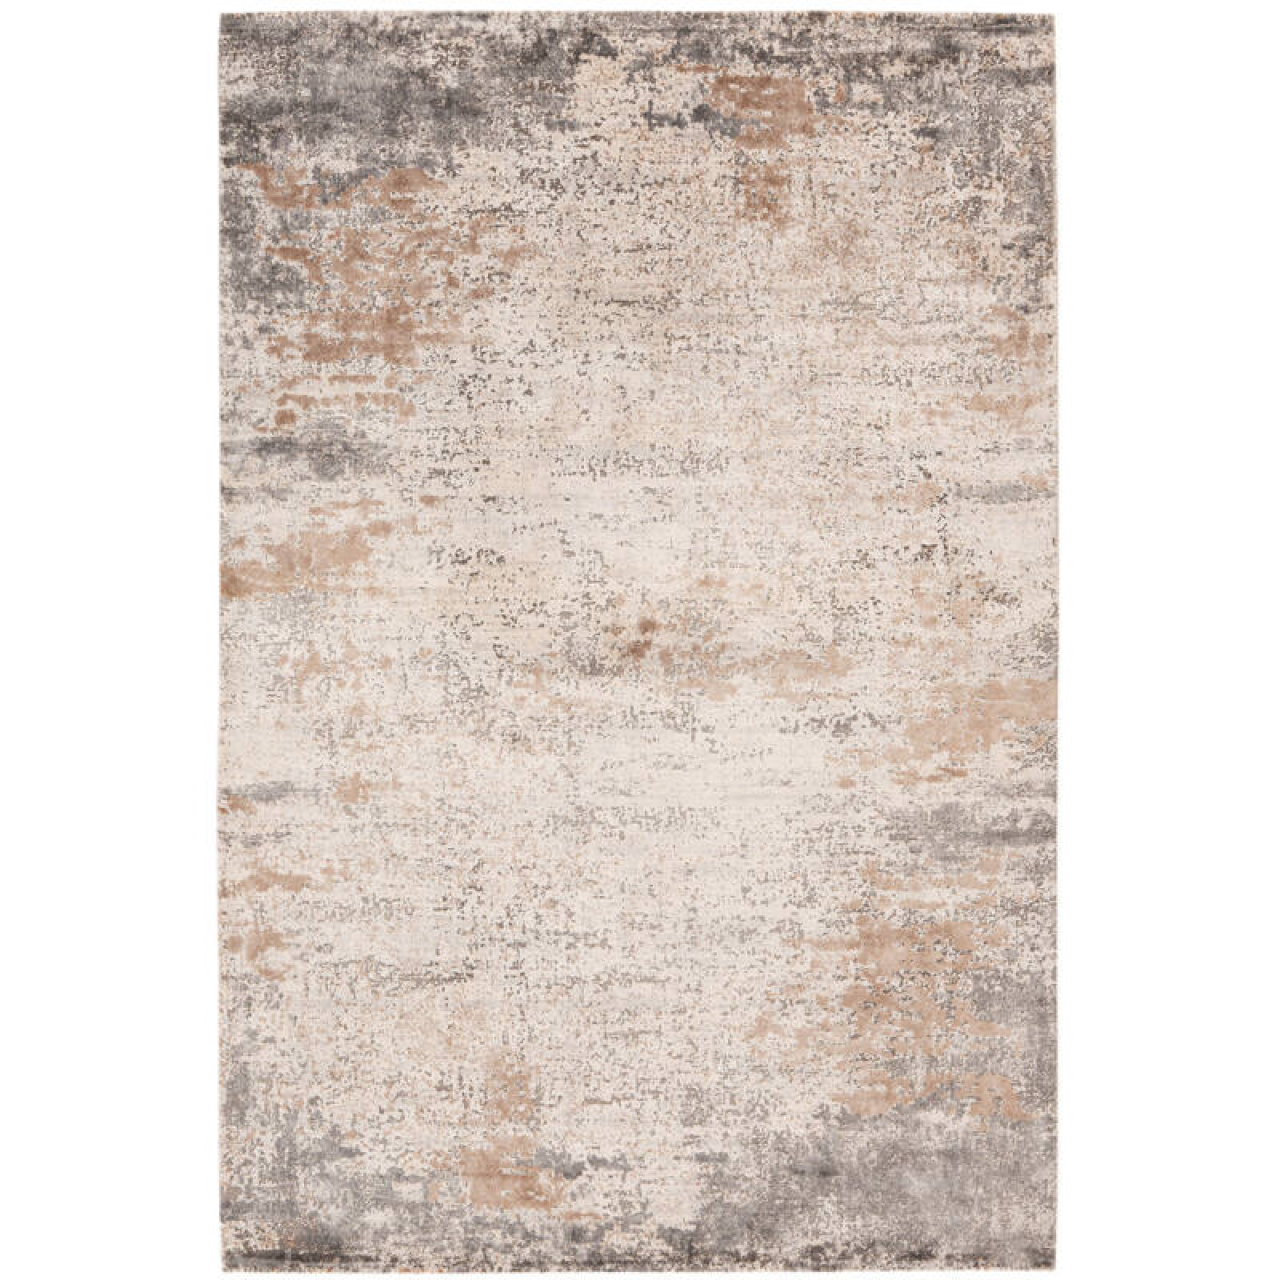 Obsession Haute Couture Jewel 953 Taupe szőnyeg-120x170